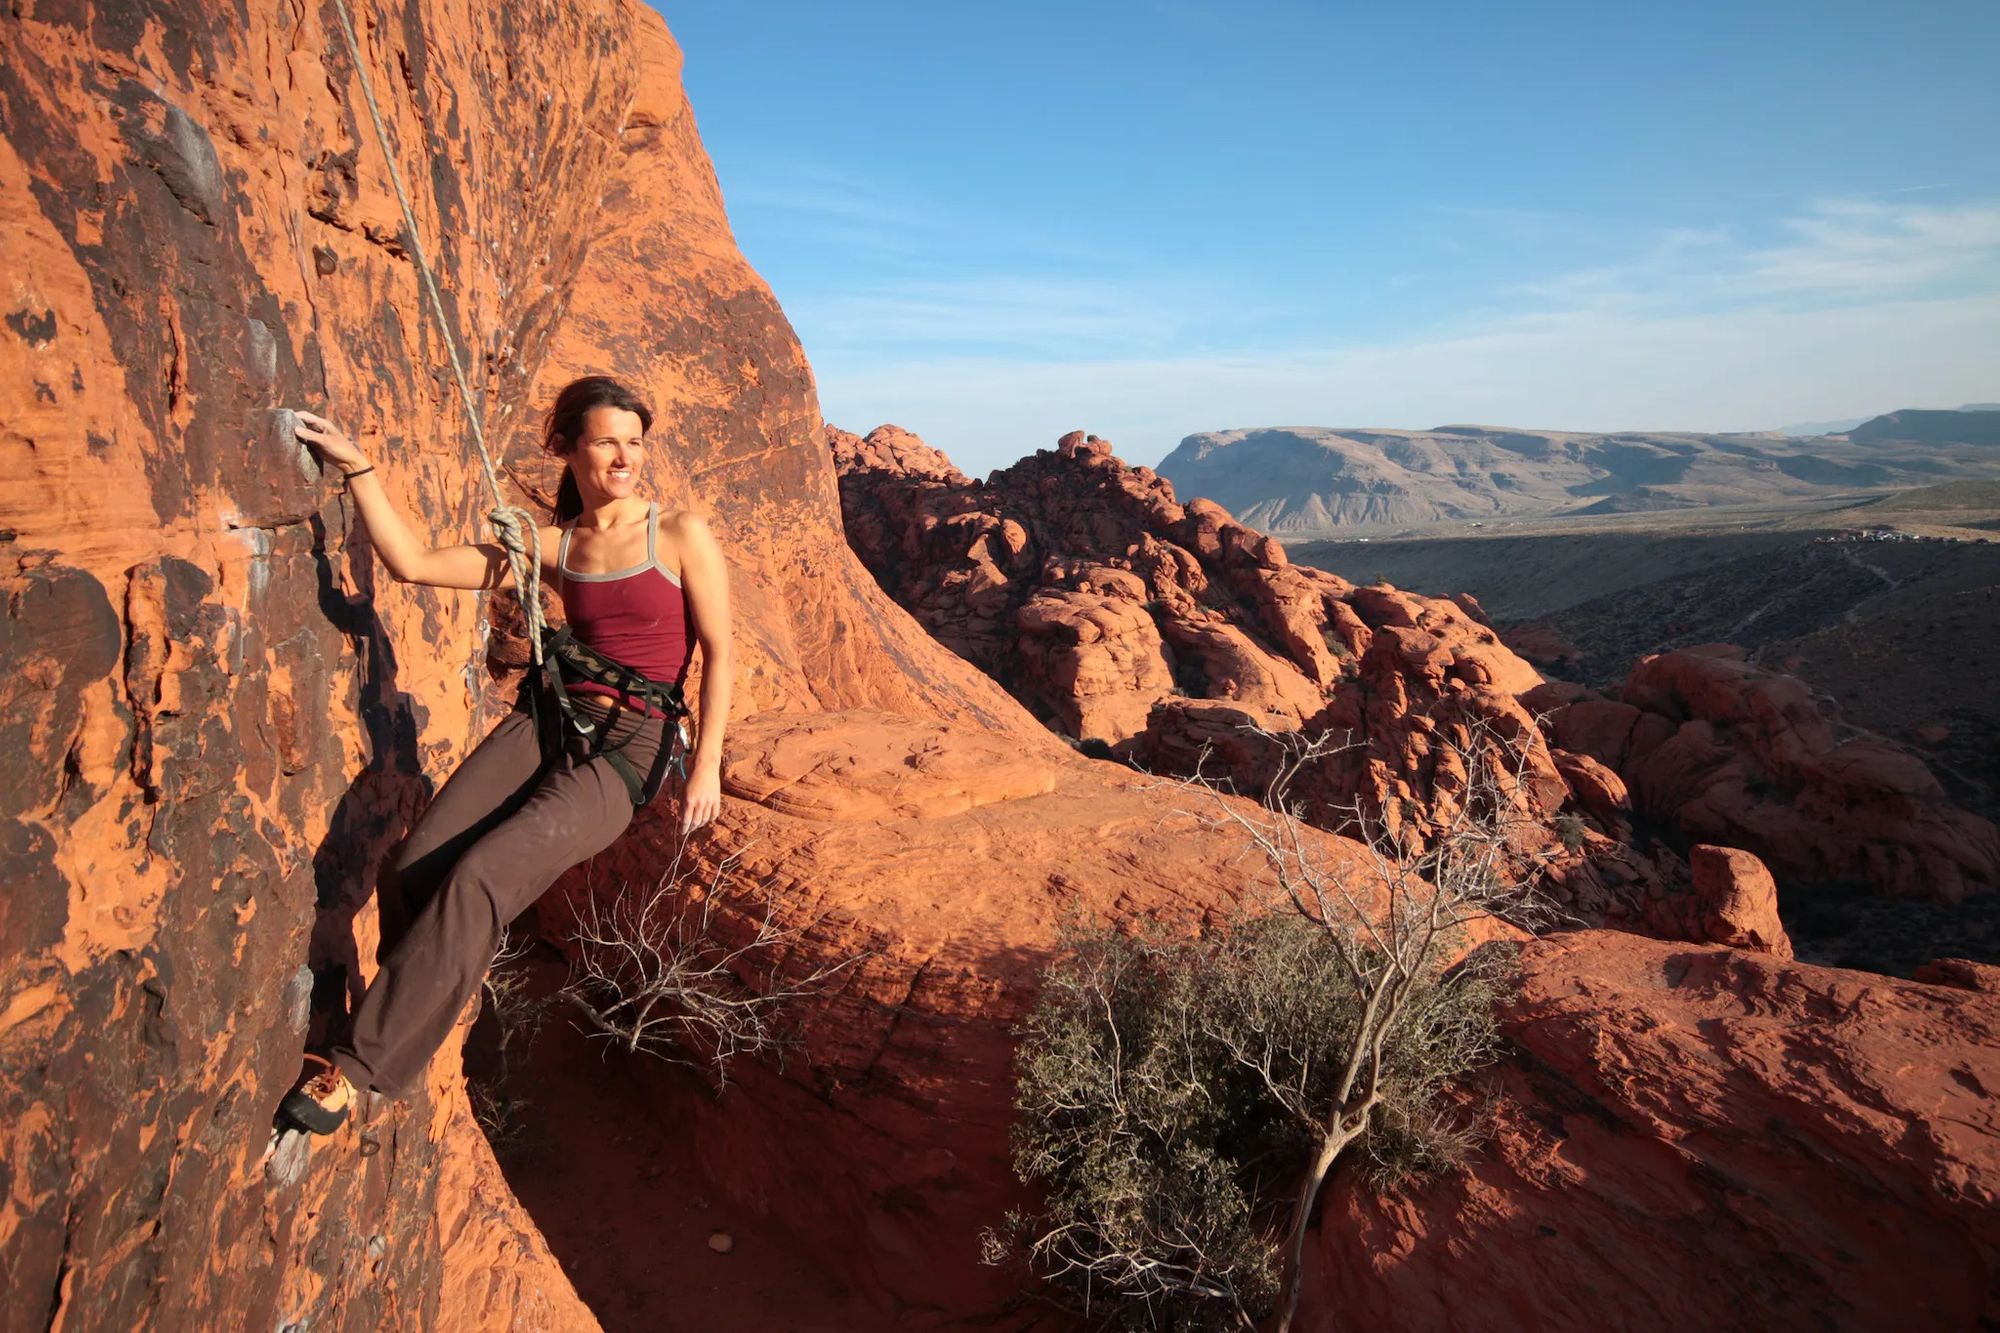 A female hiker poses on the red cliff face of the Todgha Gorge in Morocco.